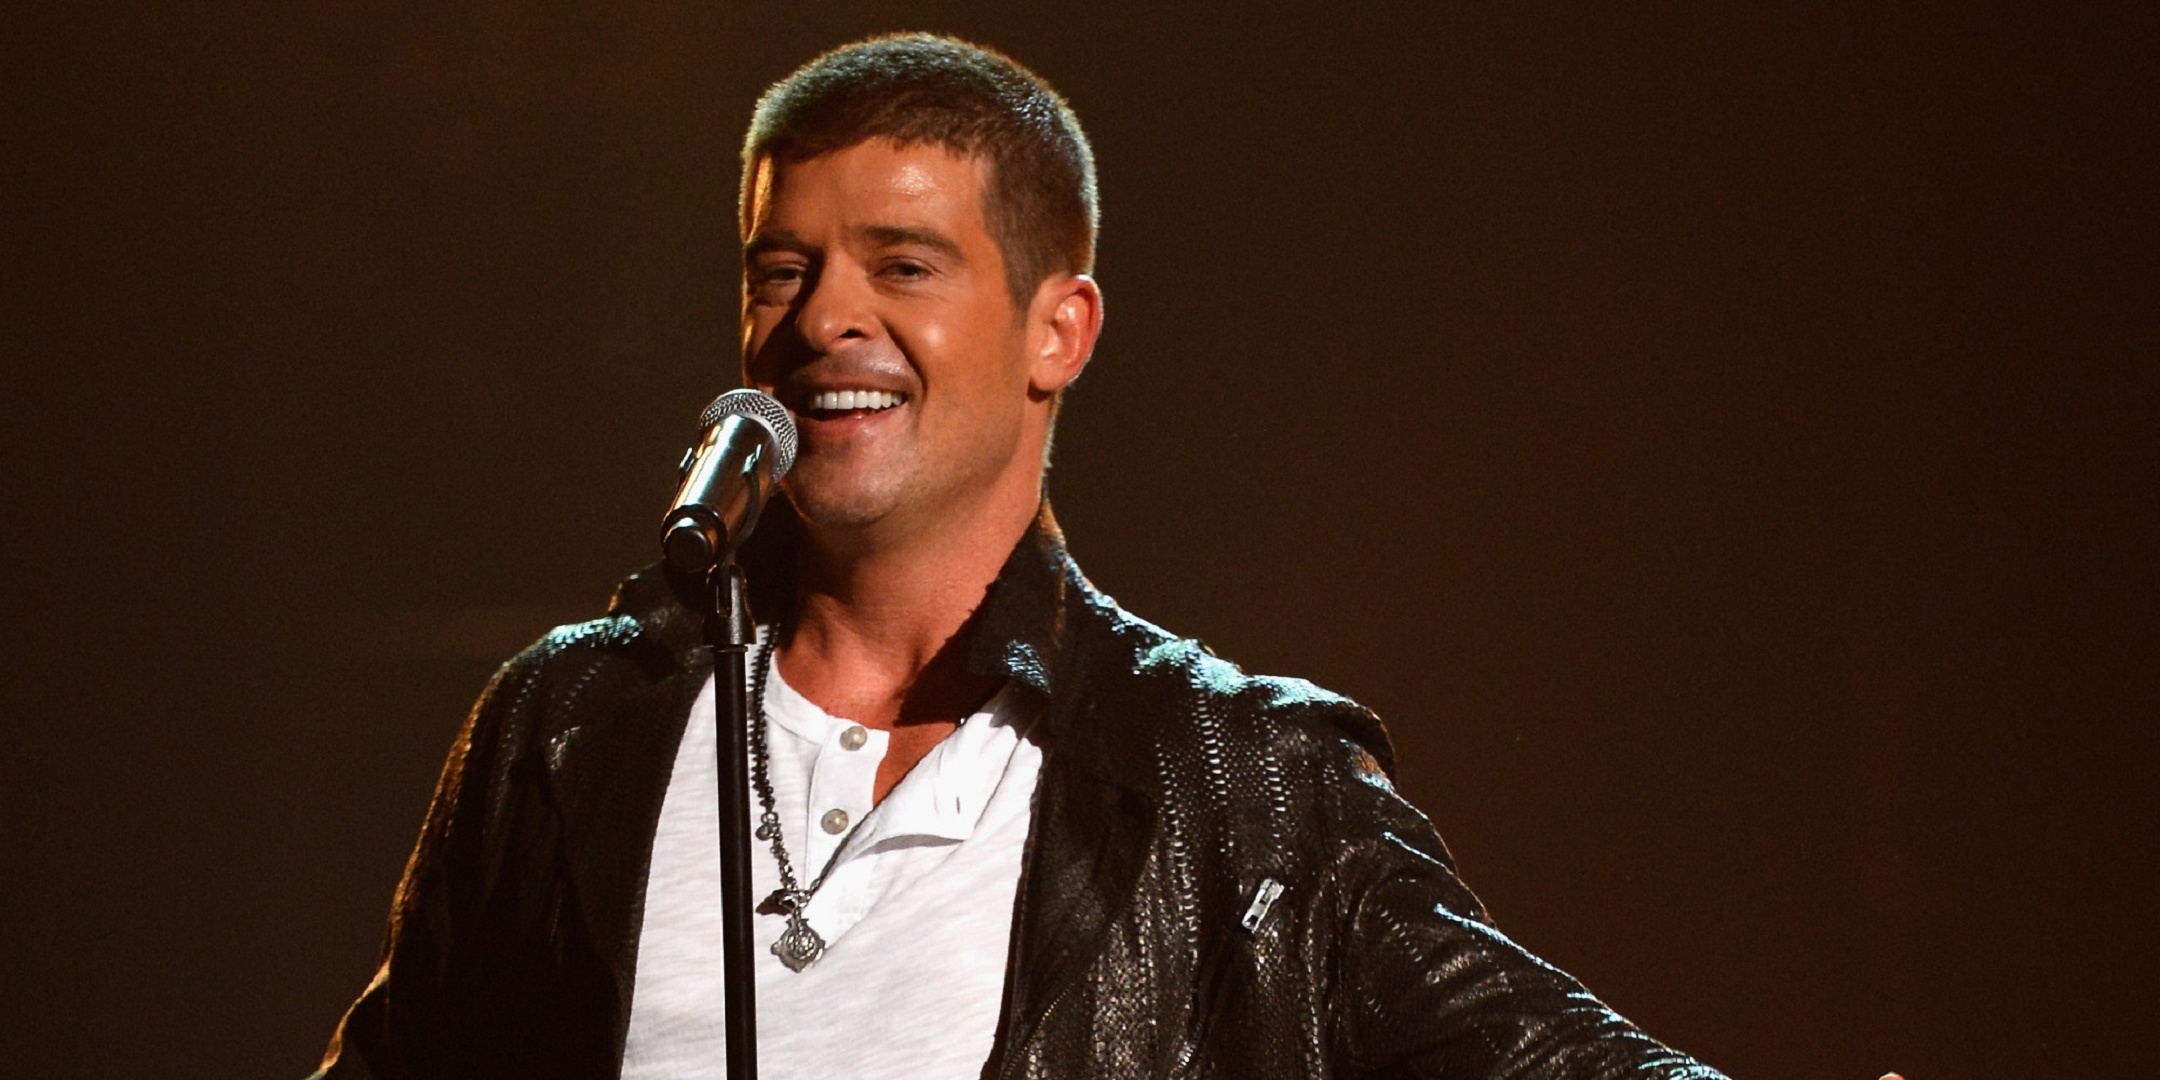 Robin Thicke, Wallpaper collection, Images, Backgrounds, 2160x1080 Dual Screen Desktop